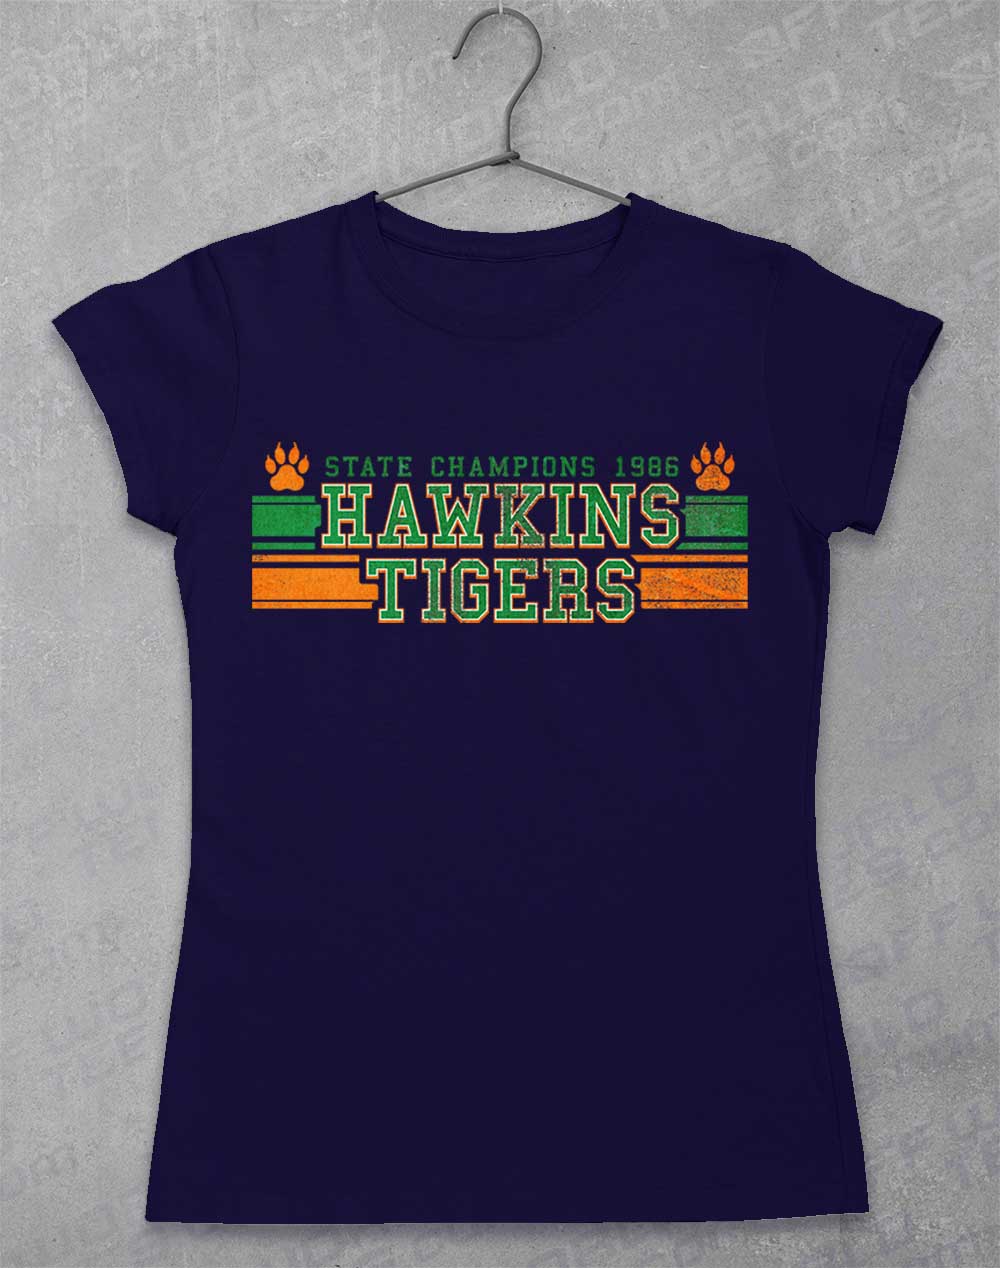 Navy - Hawkins Tigers State Champs 1986 Women's T-Shirt